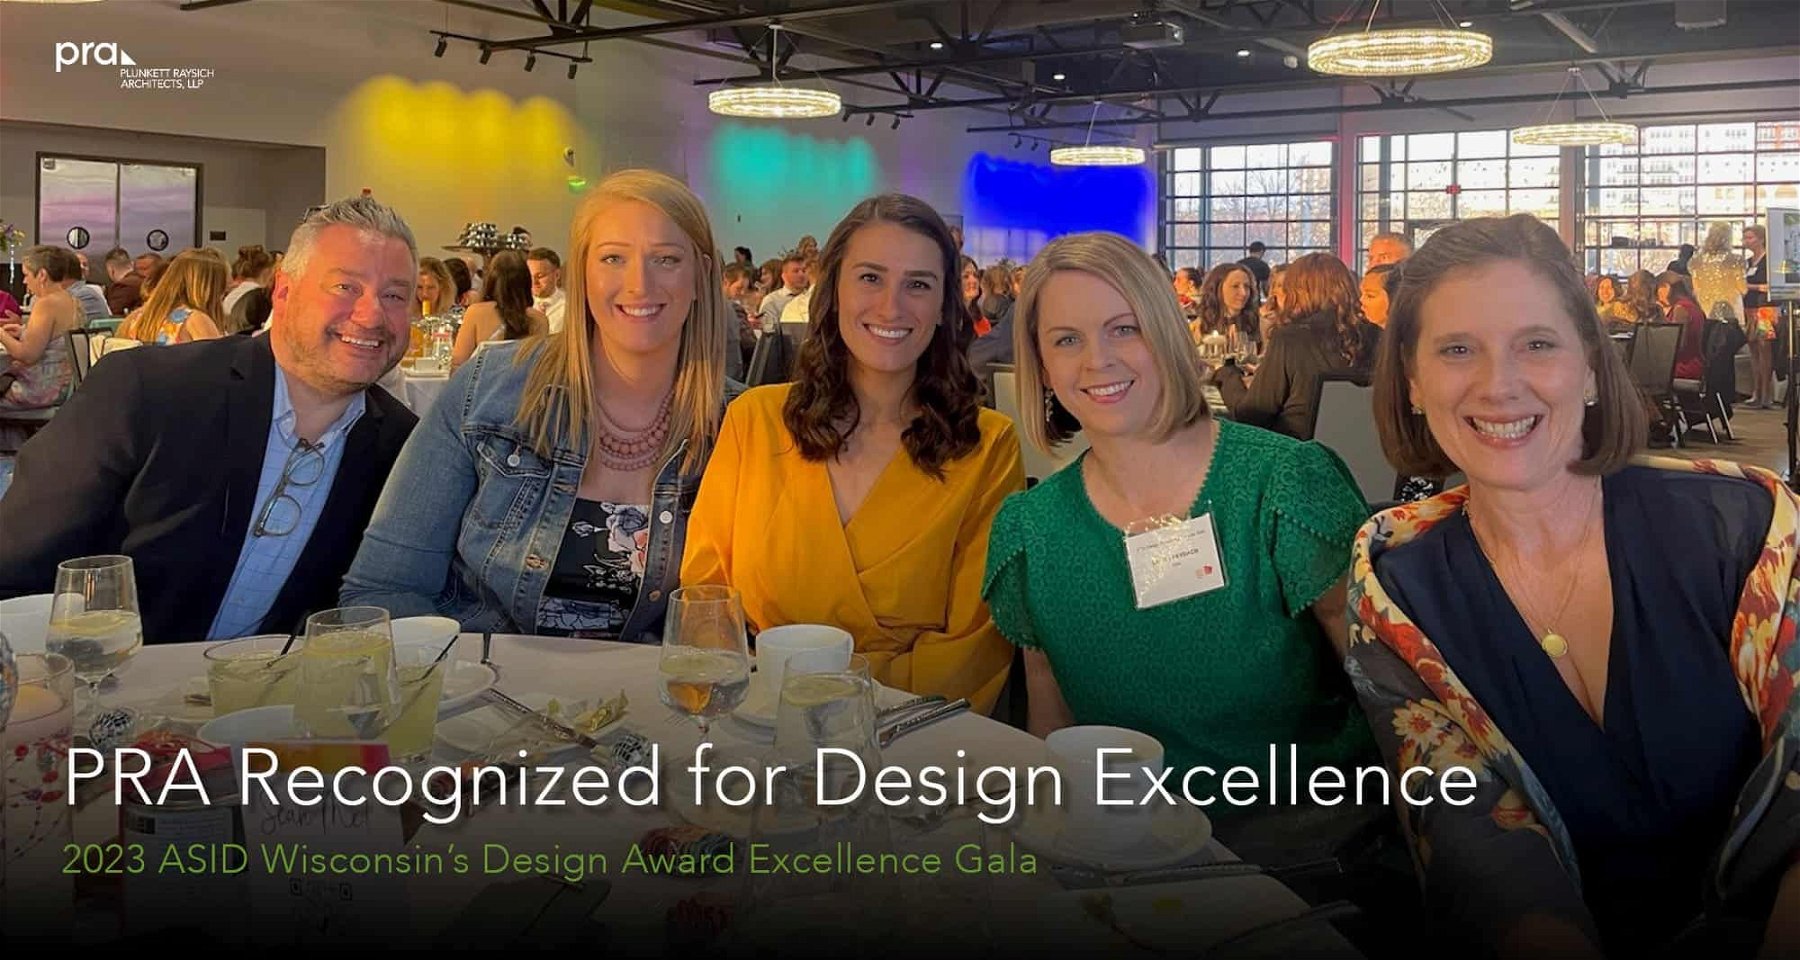 PRA IS HONORED WITH MULTIPLE AWARDS AT THE 2023 ASID WISCONSIN’S DESIGN EXCELLENCE AWARDS GALA